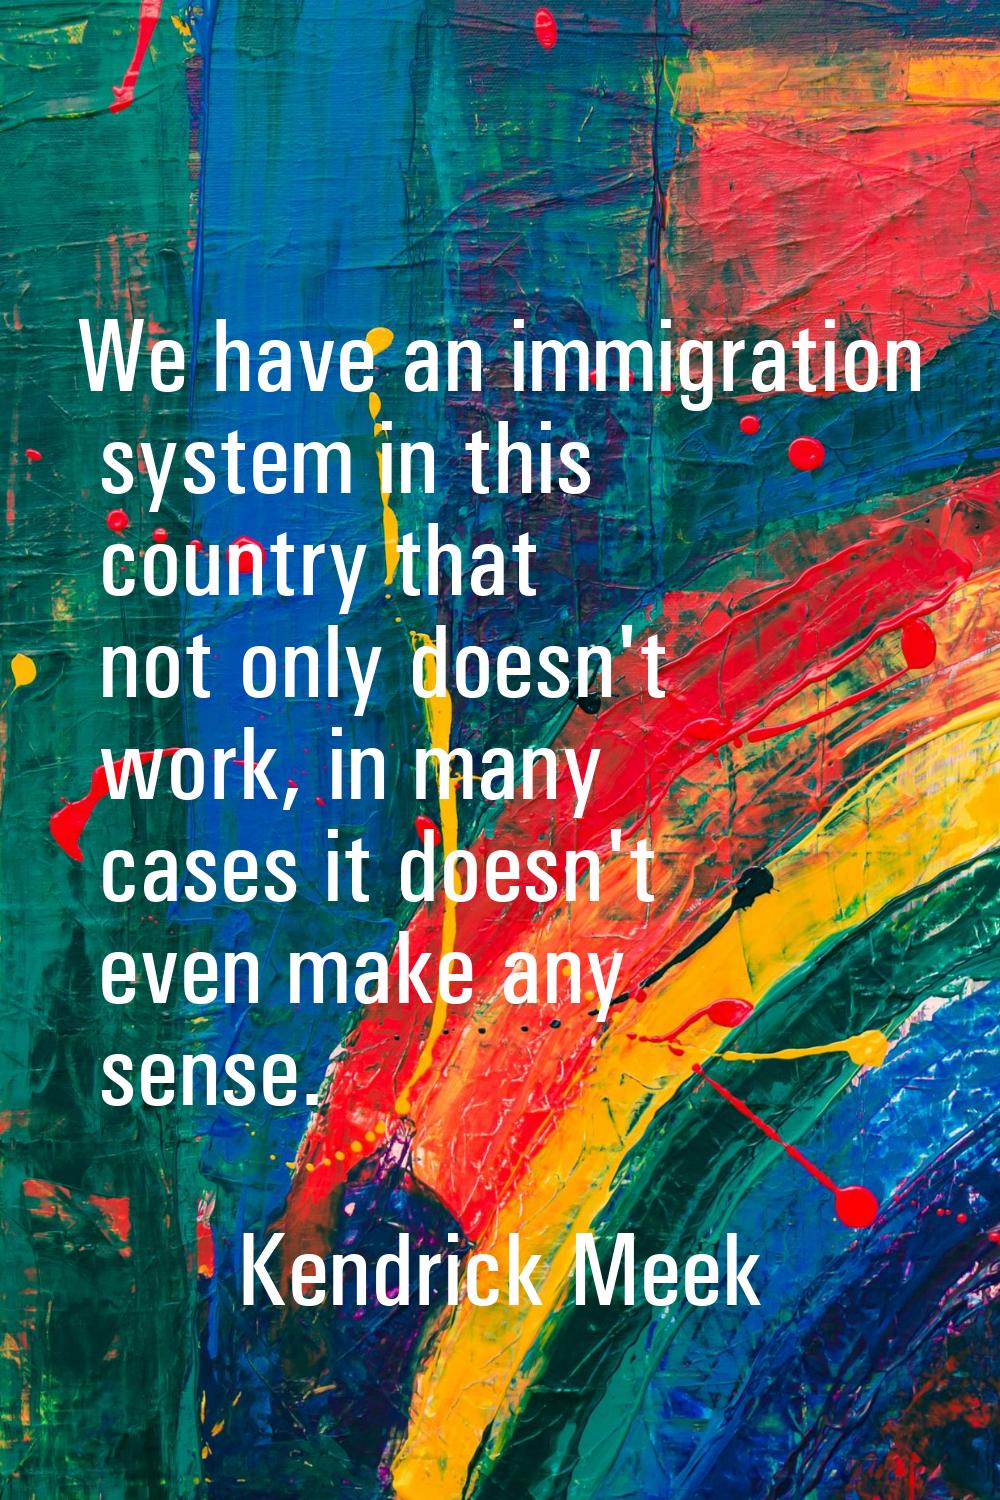 We have an immigration system in this country that not only doesn't work, in many cases it doesn't 